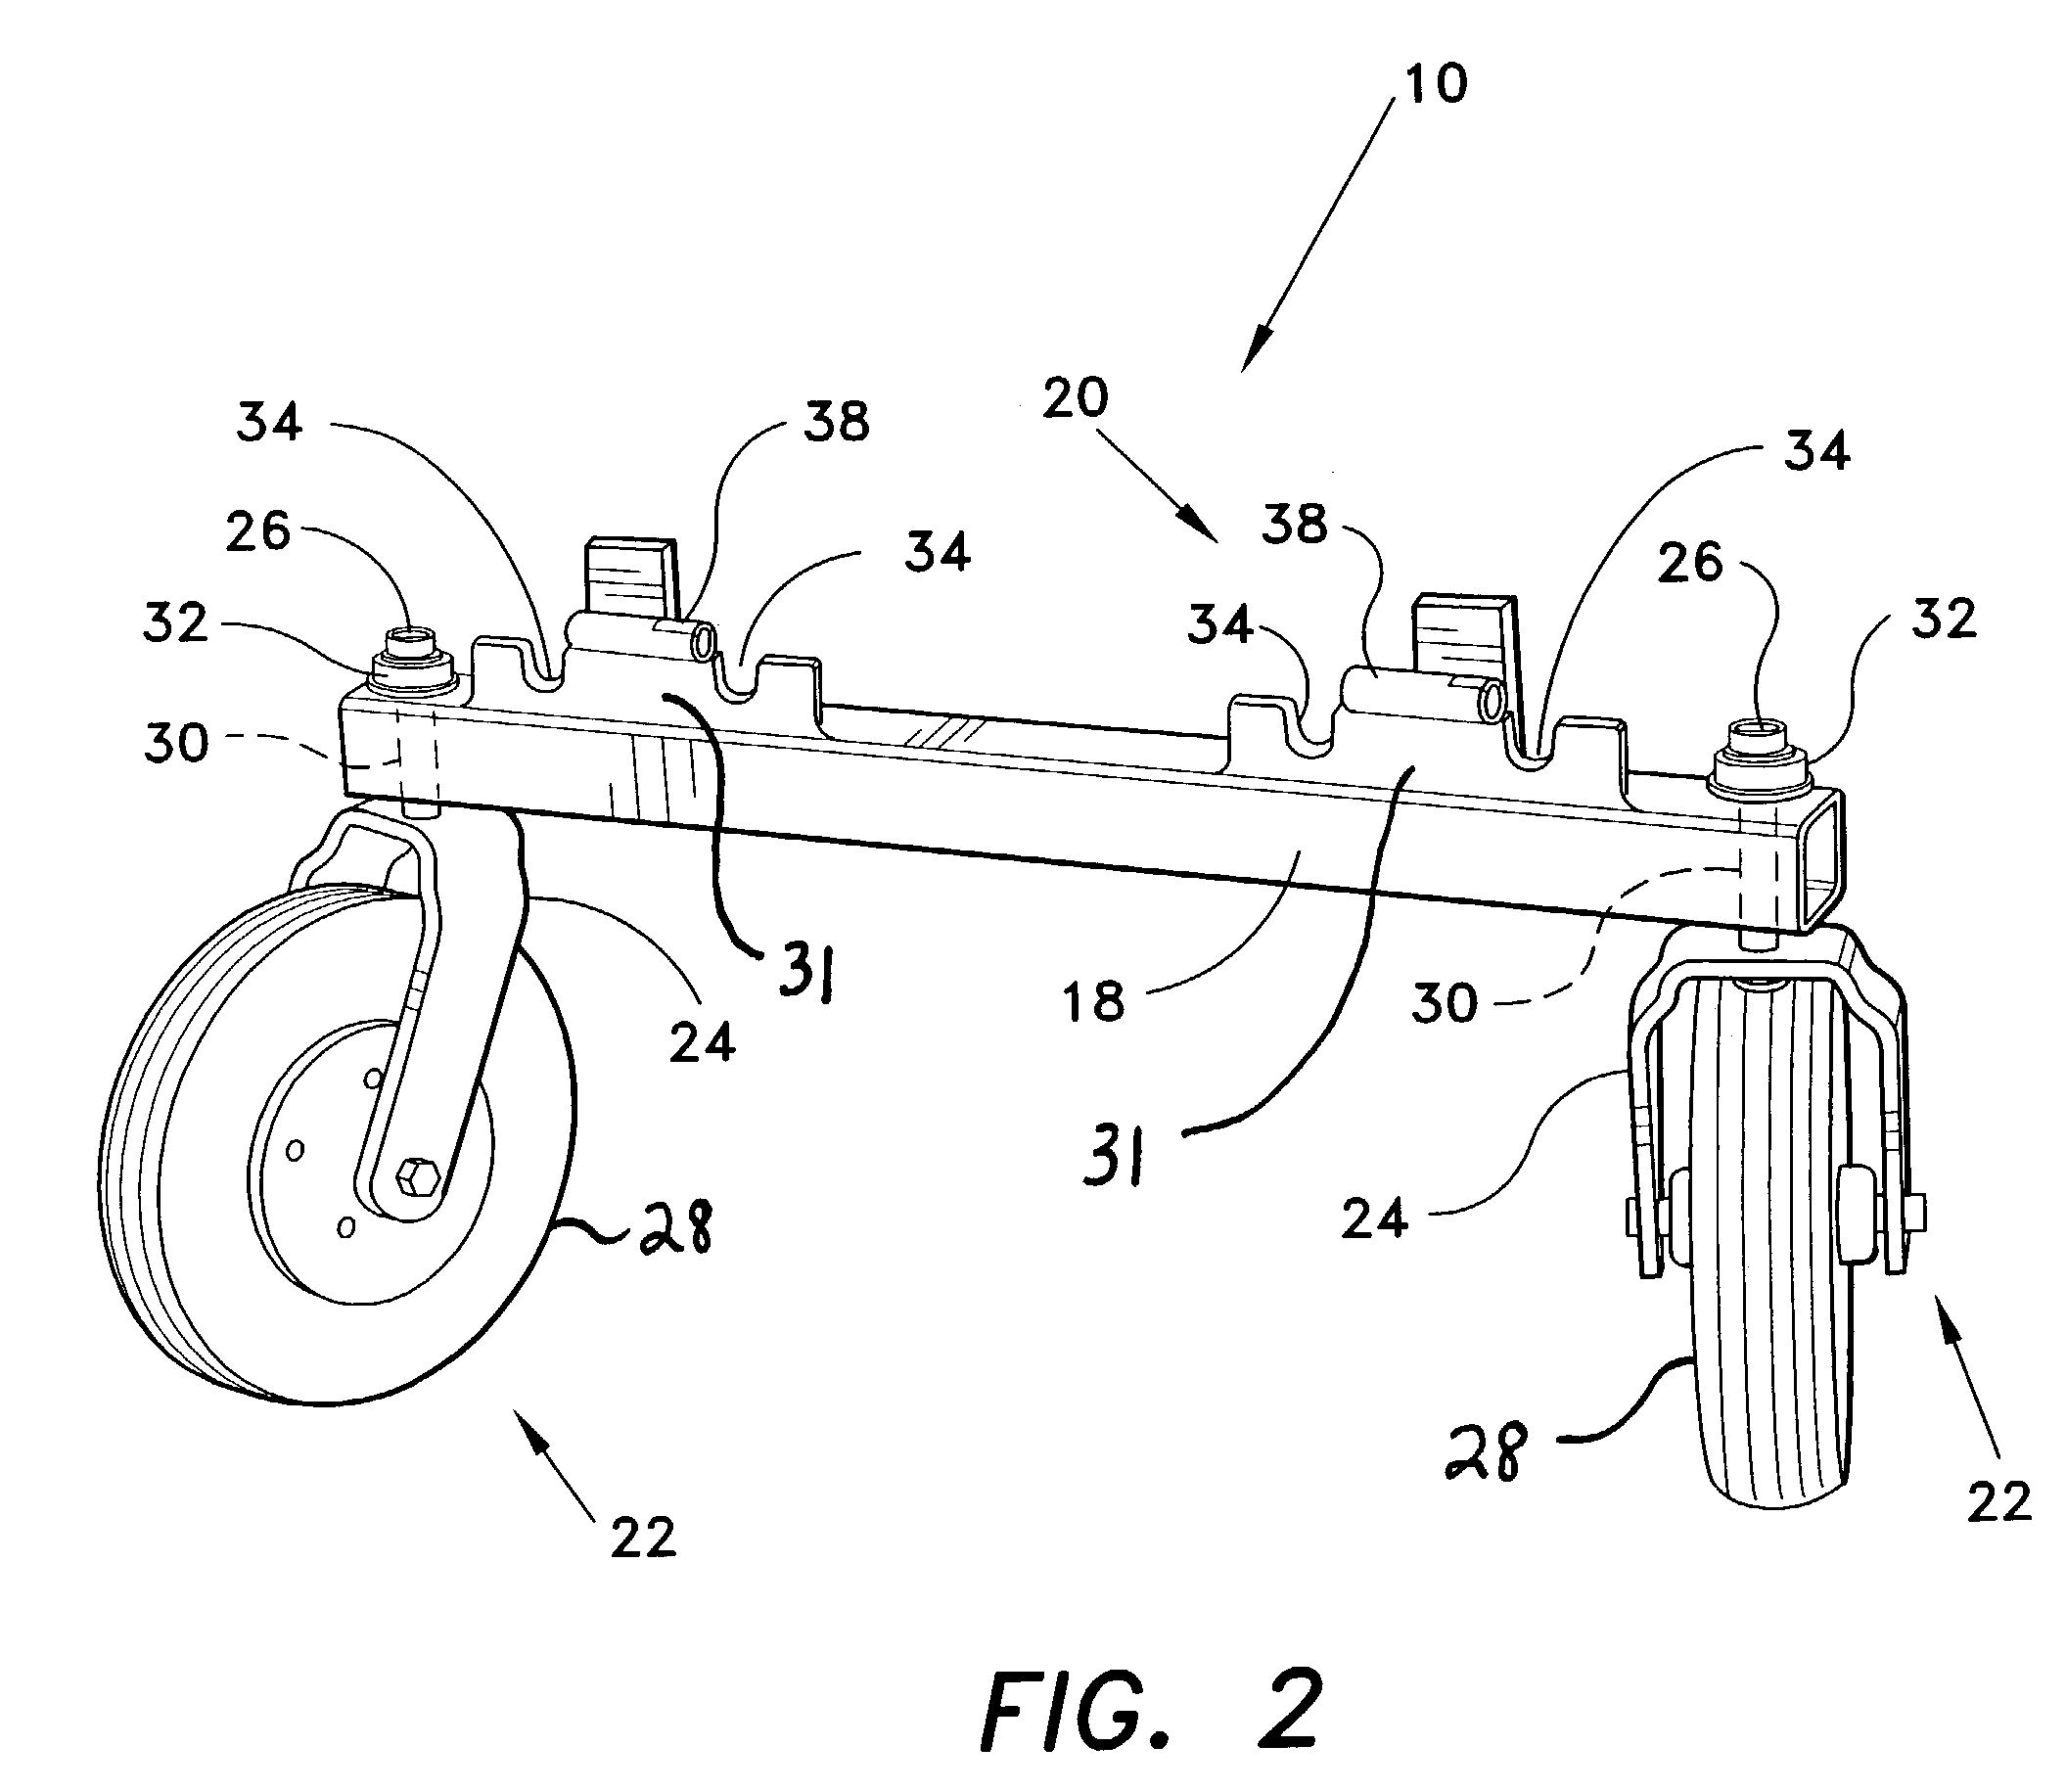 Heavy bed transporting device